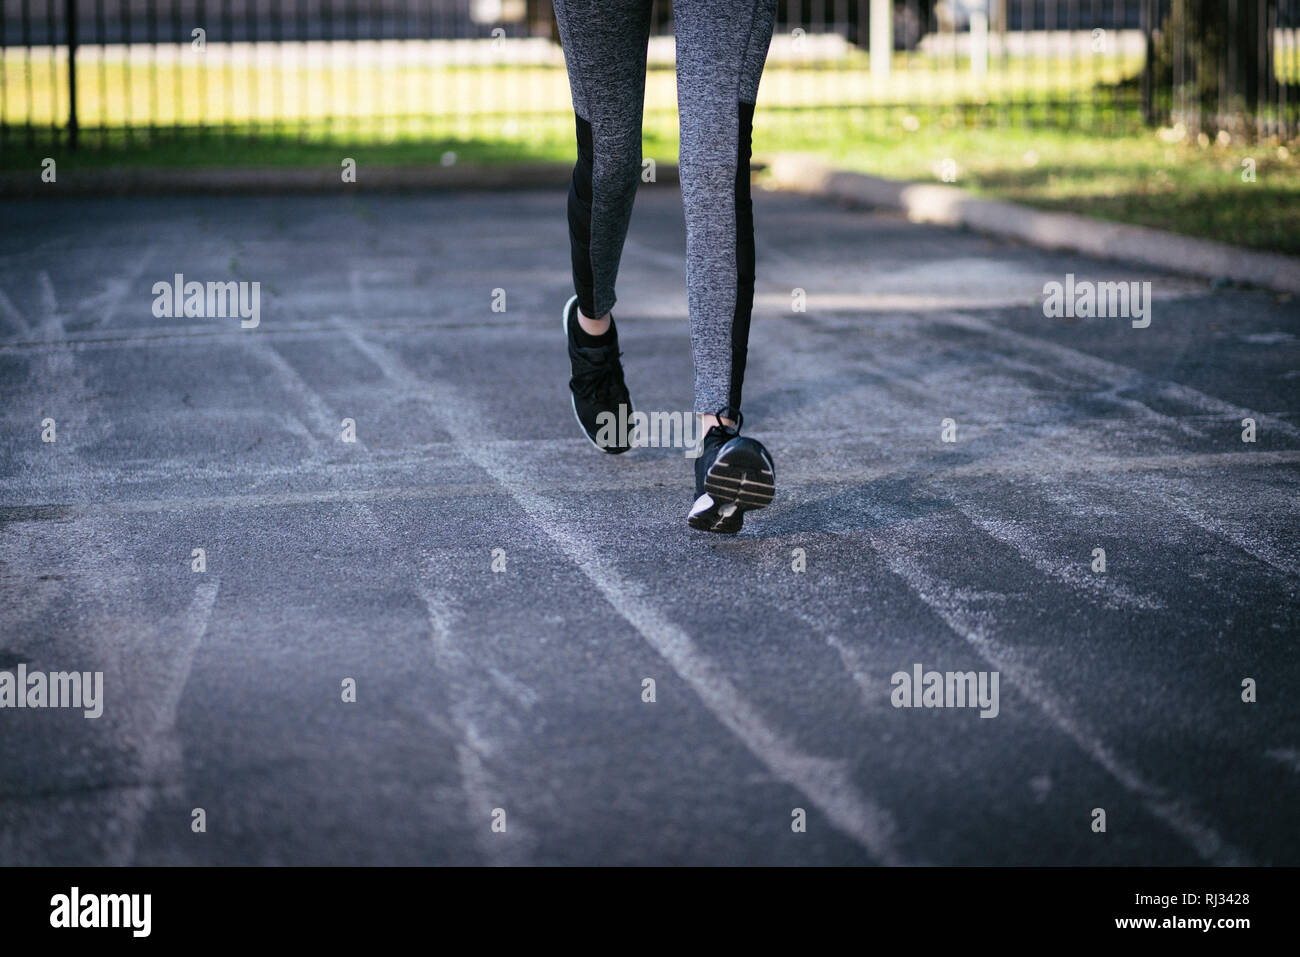 Woman's legs jogging on concrete parking lot or sidewalk for fitness exercise Stock Photo